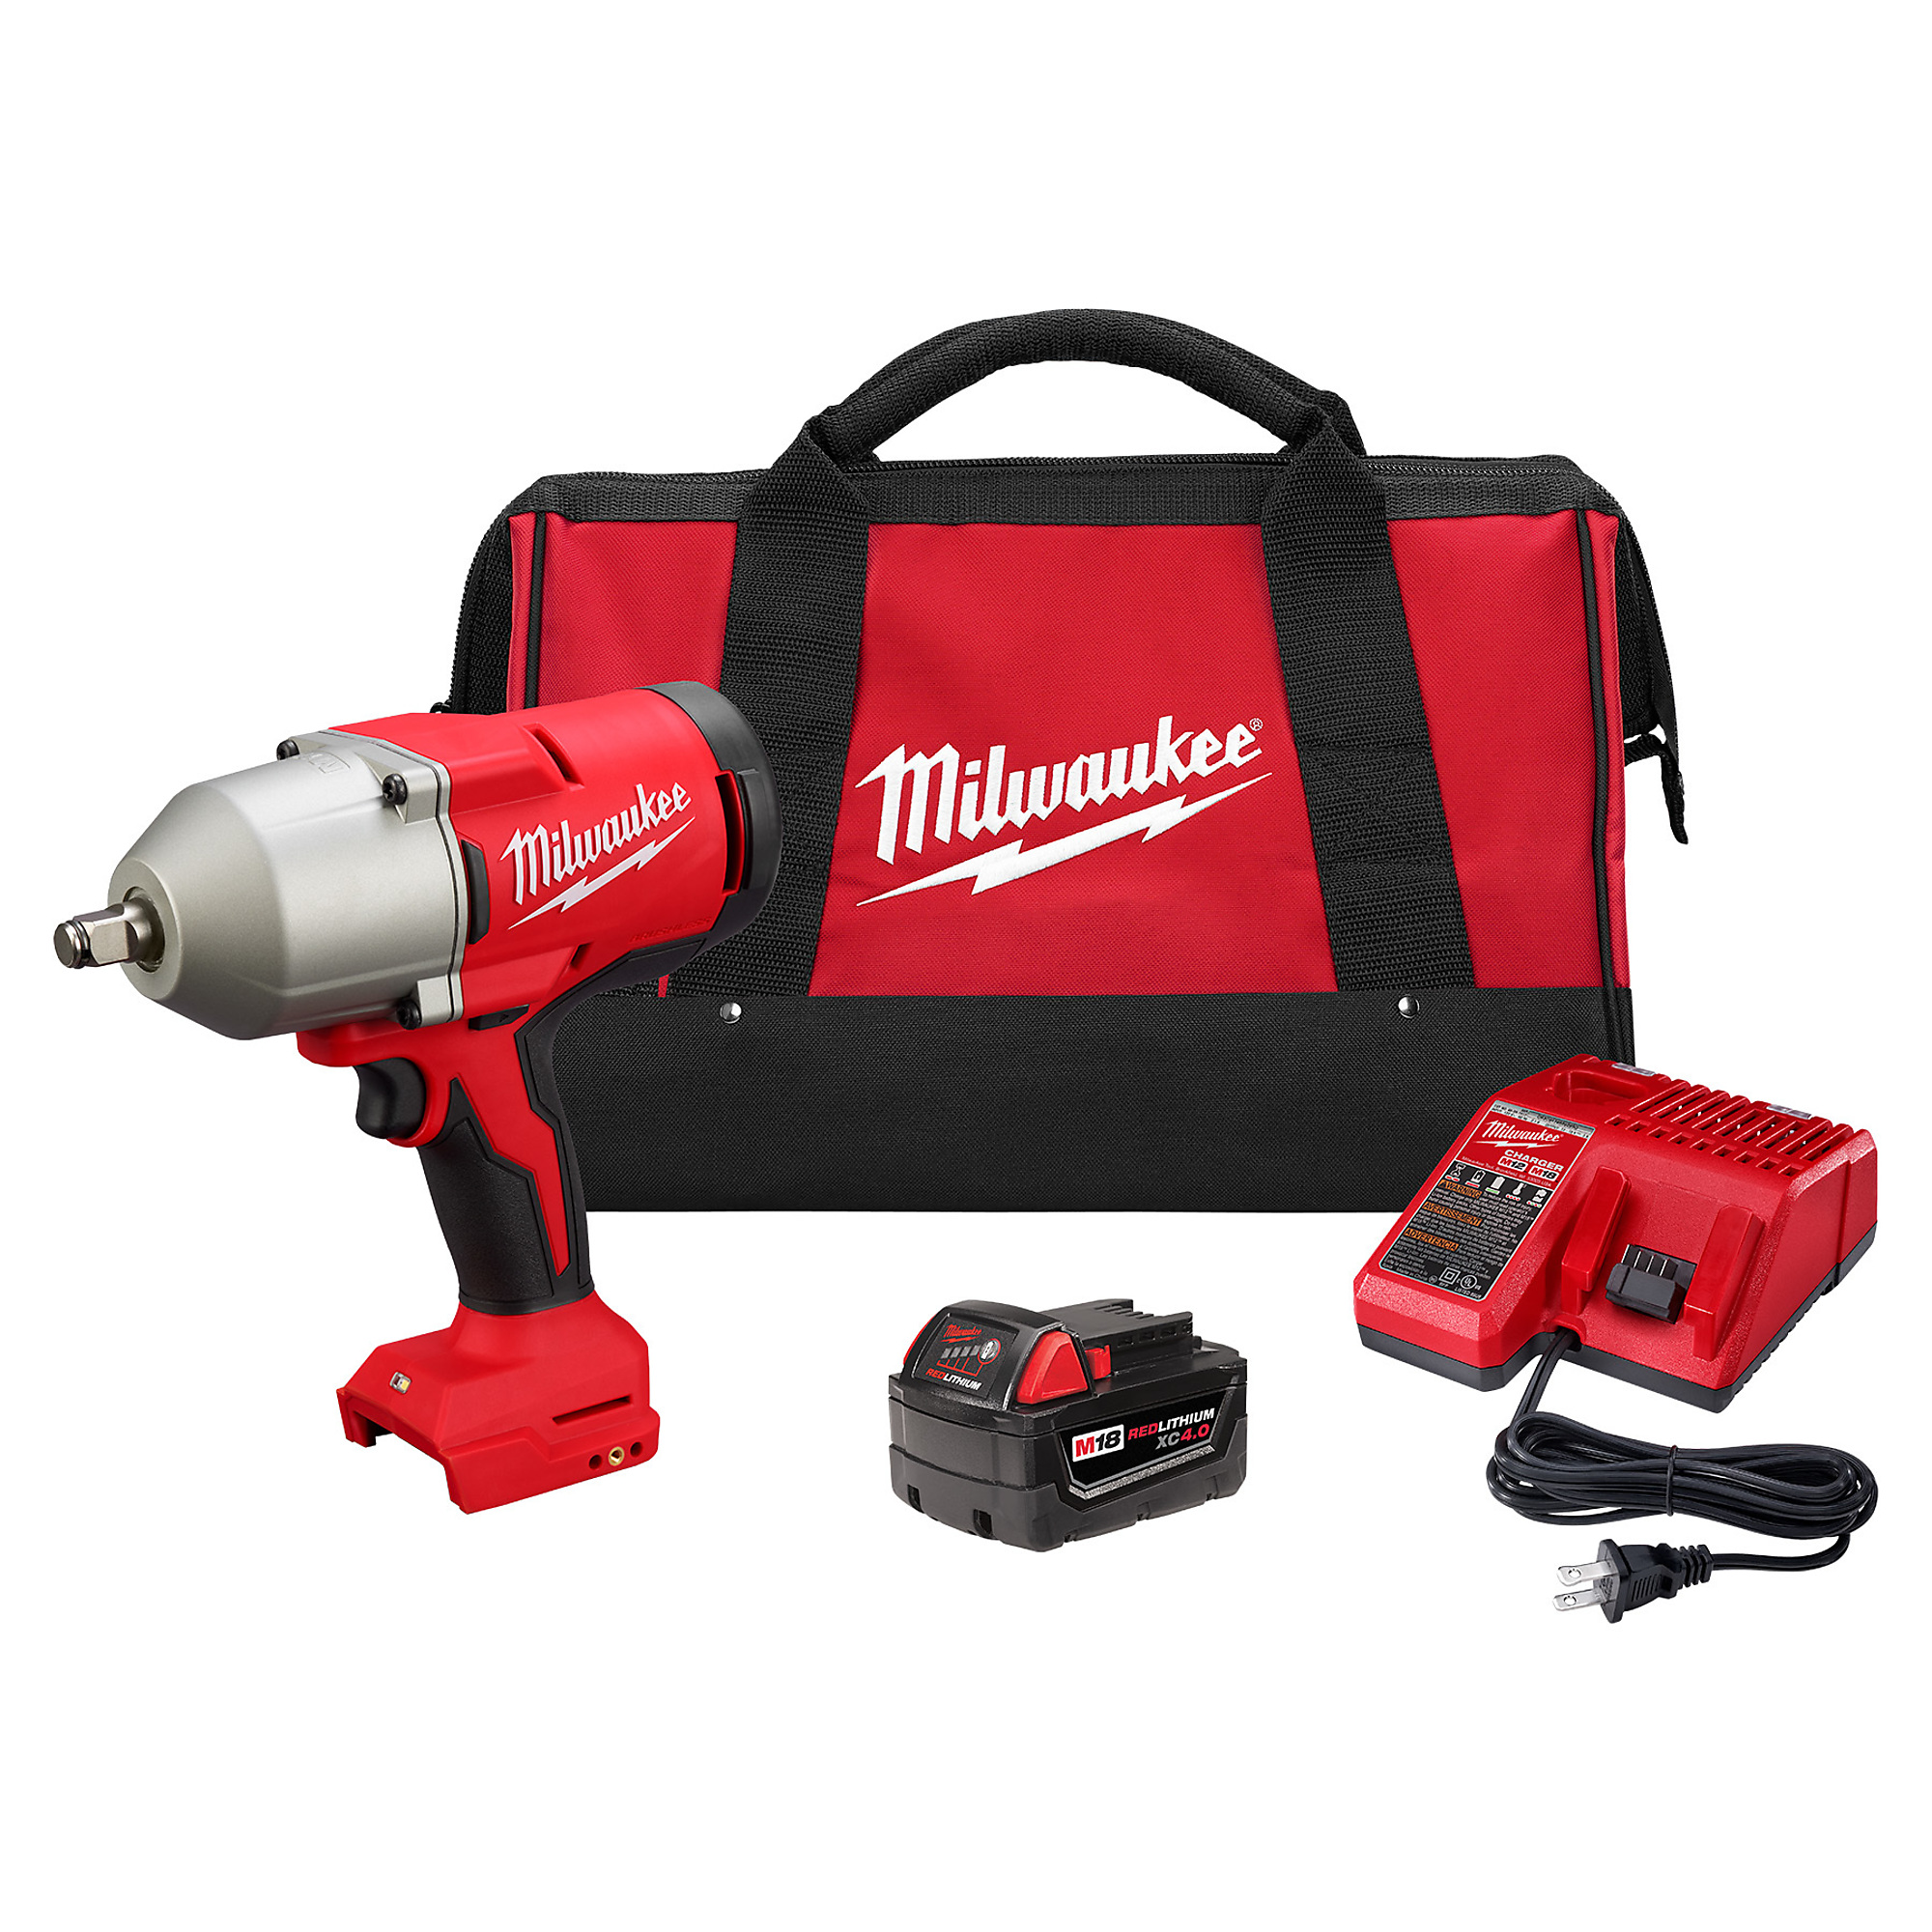 M18 Brushless 1/2Inch High Torque Impact Wrench 1-Batt Kit, Drive Size 1/2 in, Volts 18 Battery Type Lithium-ion, Model - Milwaukee 2666-21B